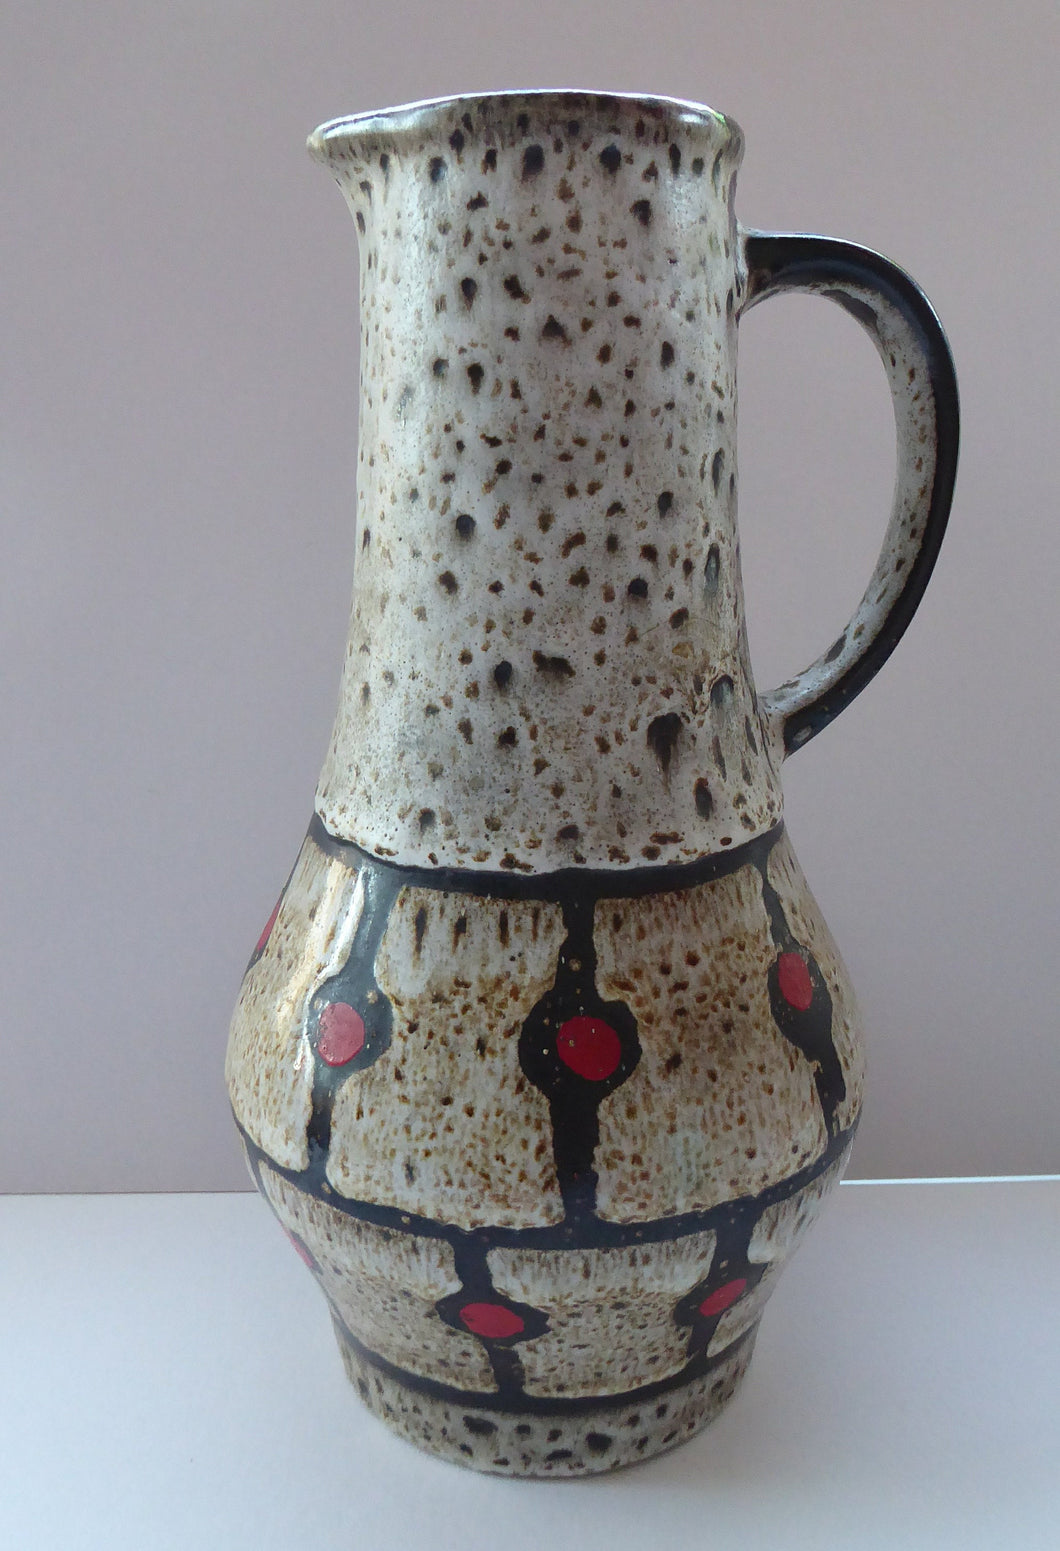 Vintage 1970s West German Pottery Handled Vase or Pitcher. JASBA WARE with Orange Polka Dot Pattern. 10 inches high